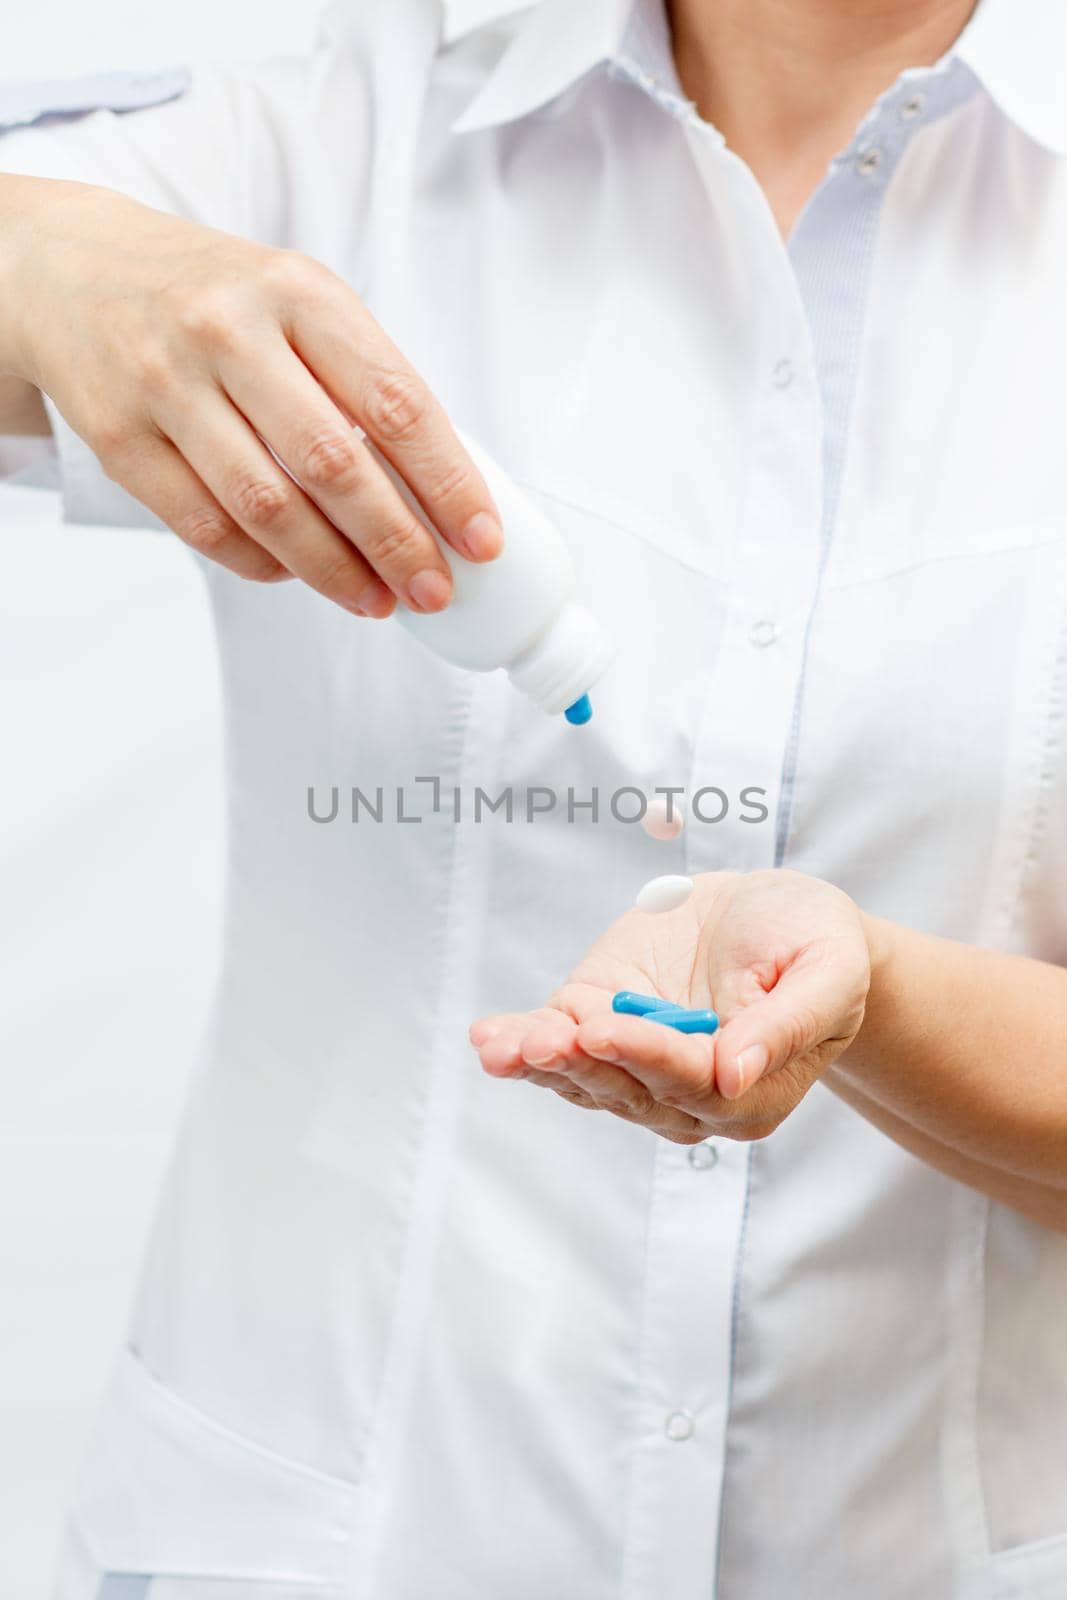 Female doctor holding a jar and offering pills. The tablets fall out of the bottle. Selective focus on pills